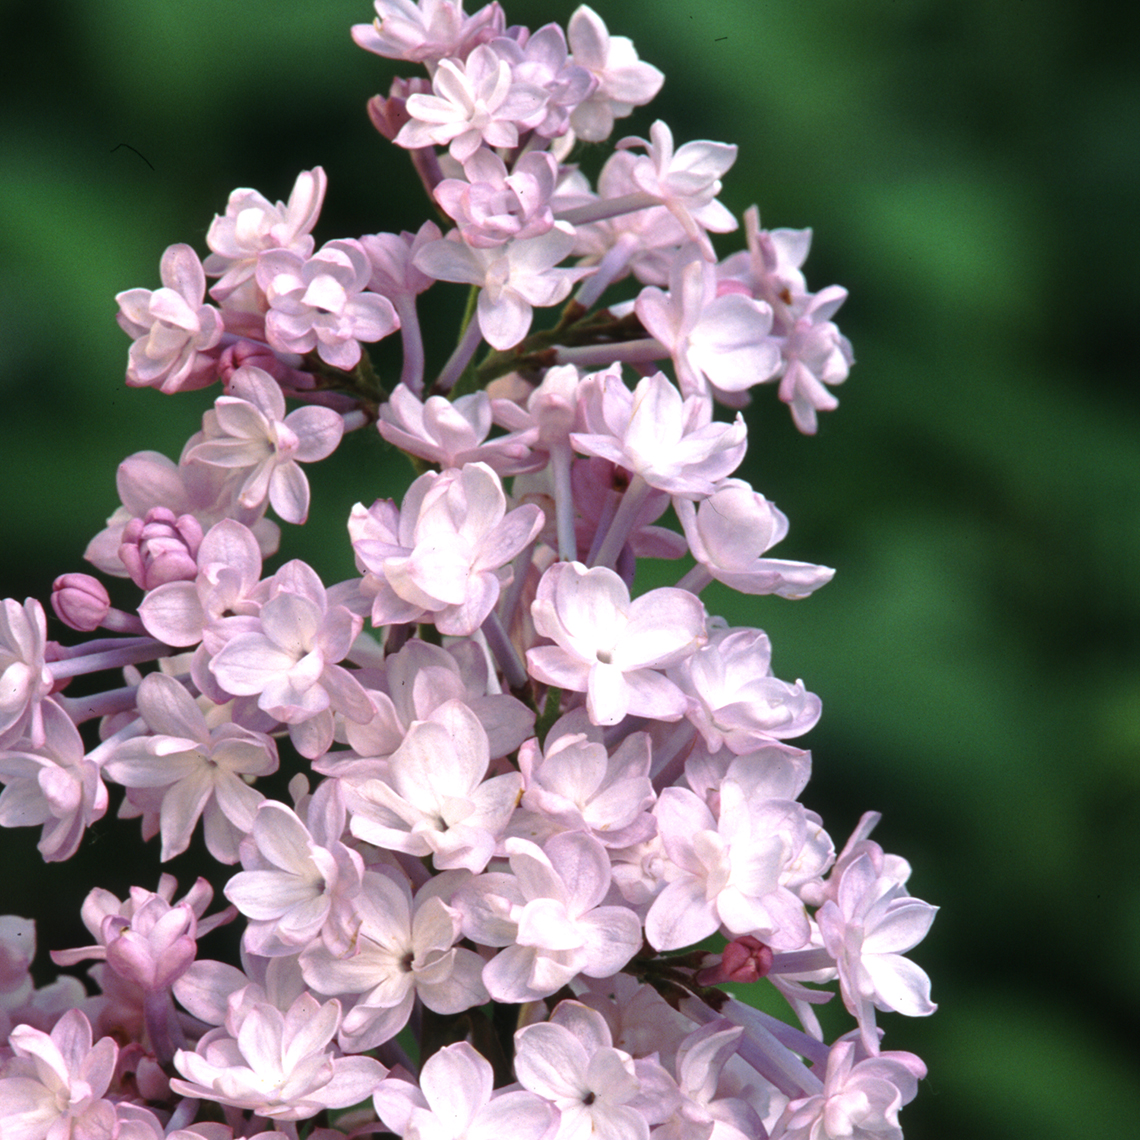 Closeup of the double light purple blooms of Anabel lilac